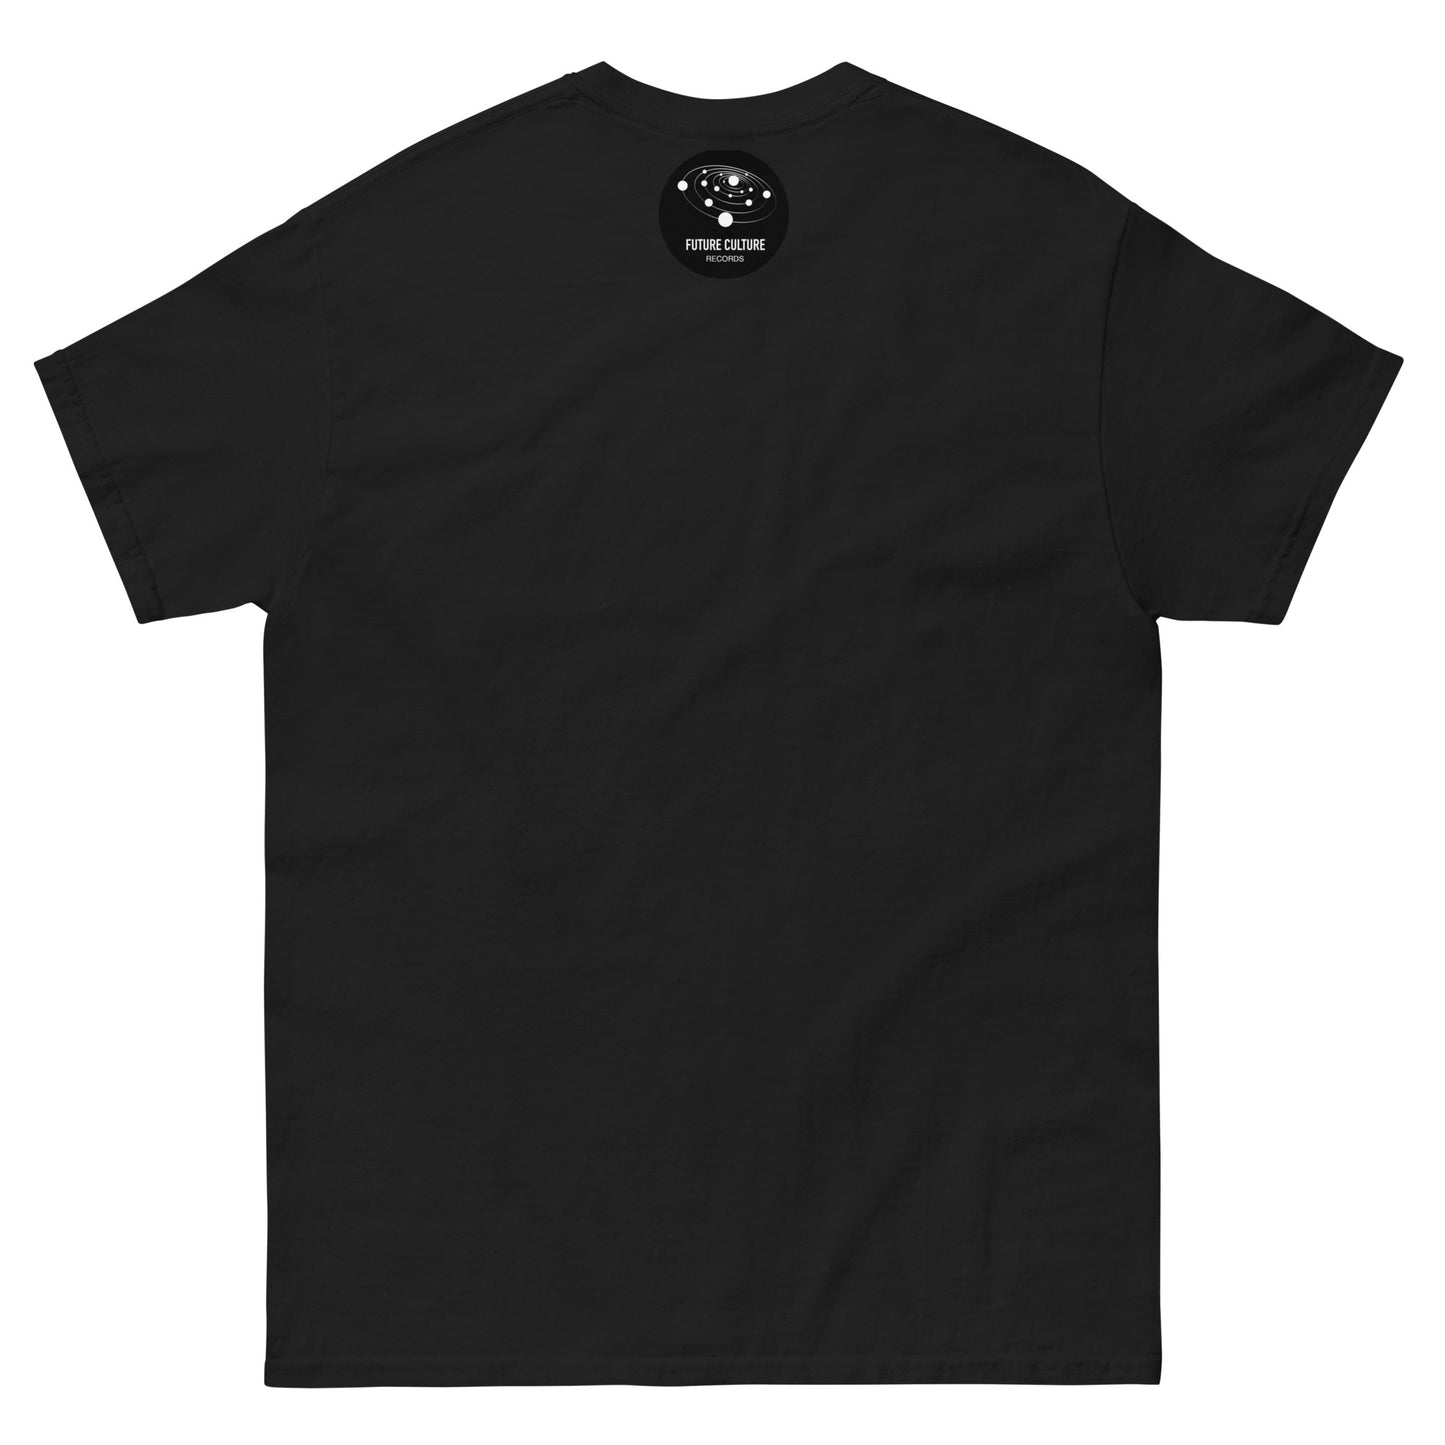 CABLEMIND T SHIRT